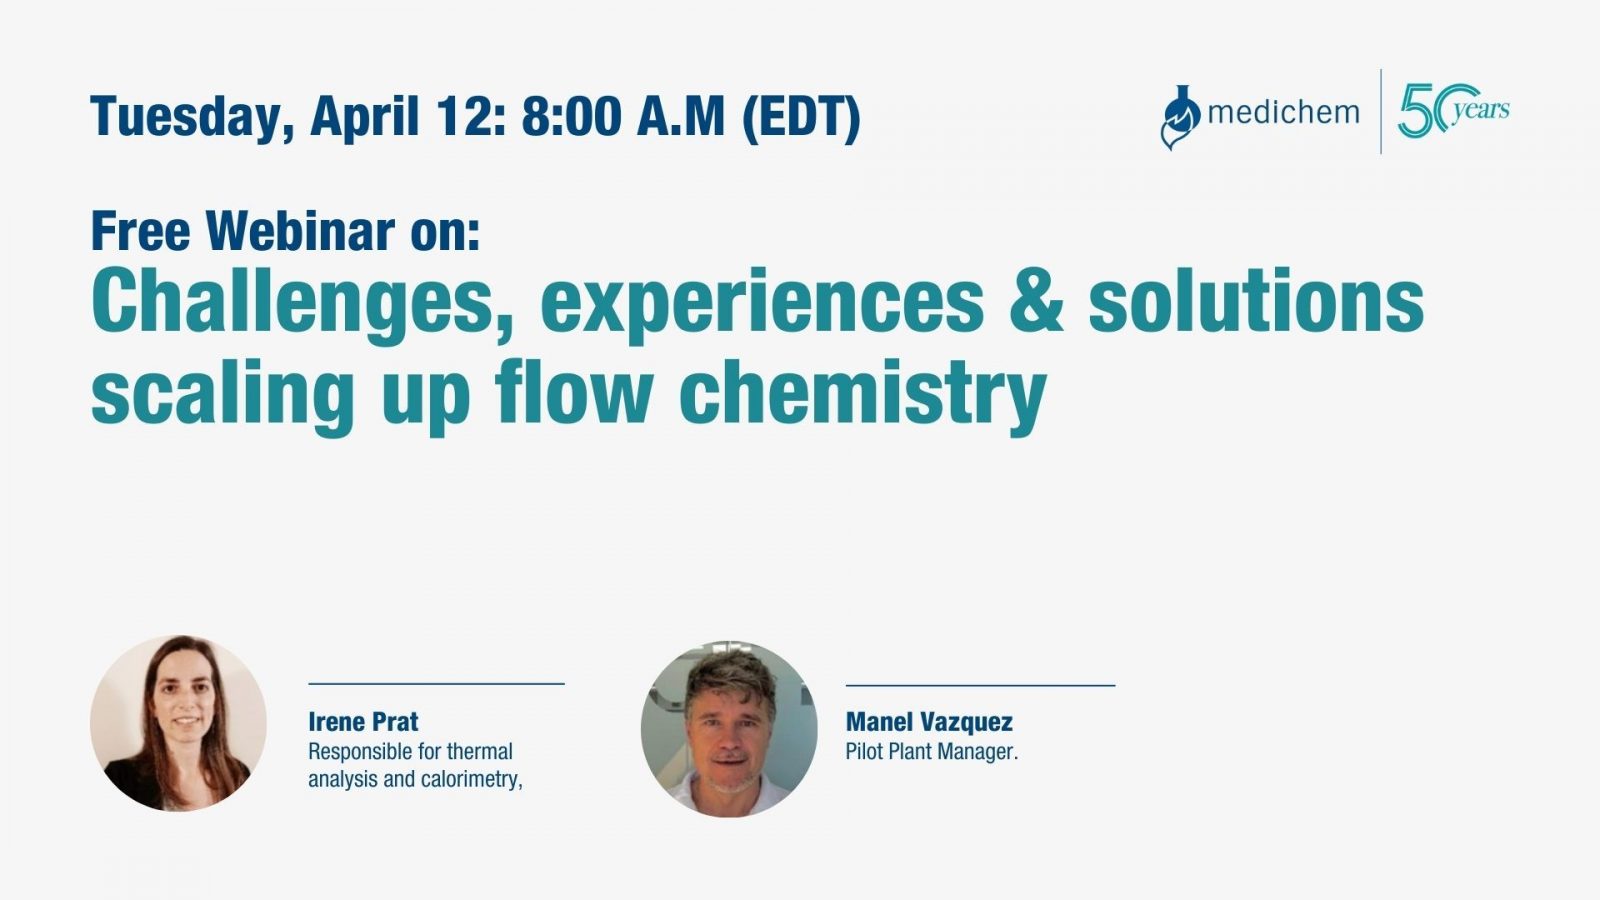 Medichem organized the Webinar Challenges experience and solutions scaling up flow chemistry